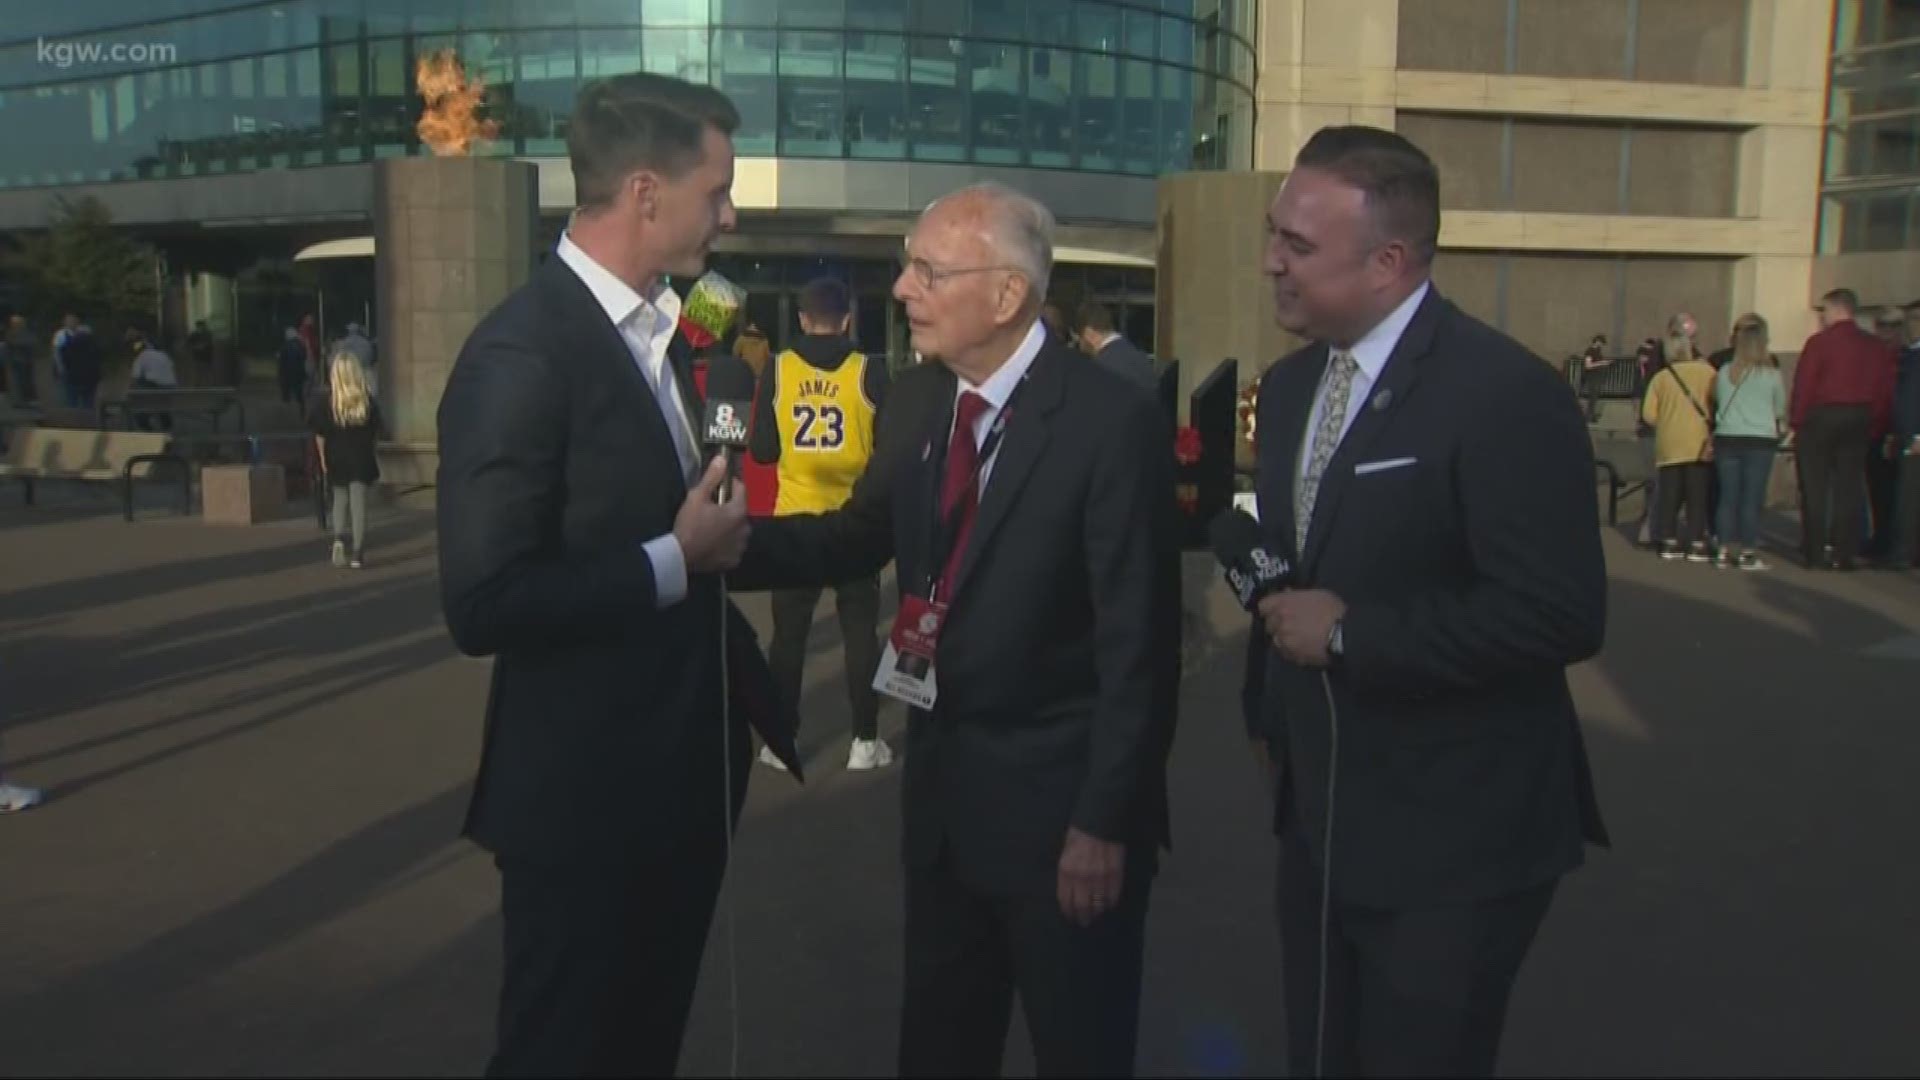 Former Blazers broadcaster Bill Schonely joined KGW to talk all things "Rip City."